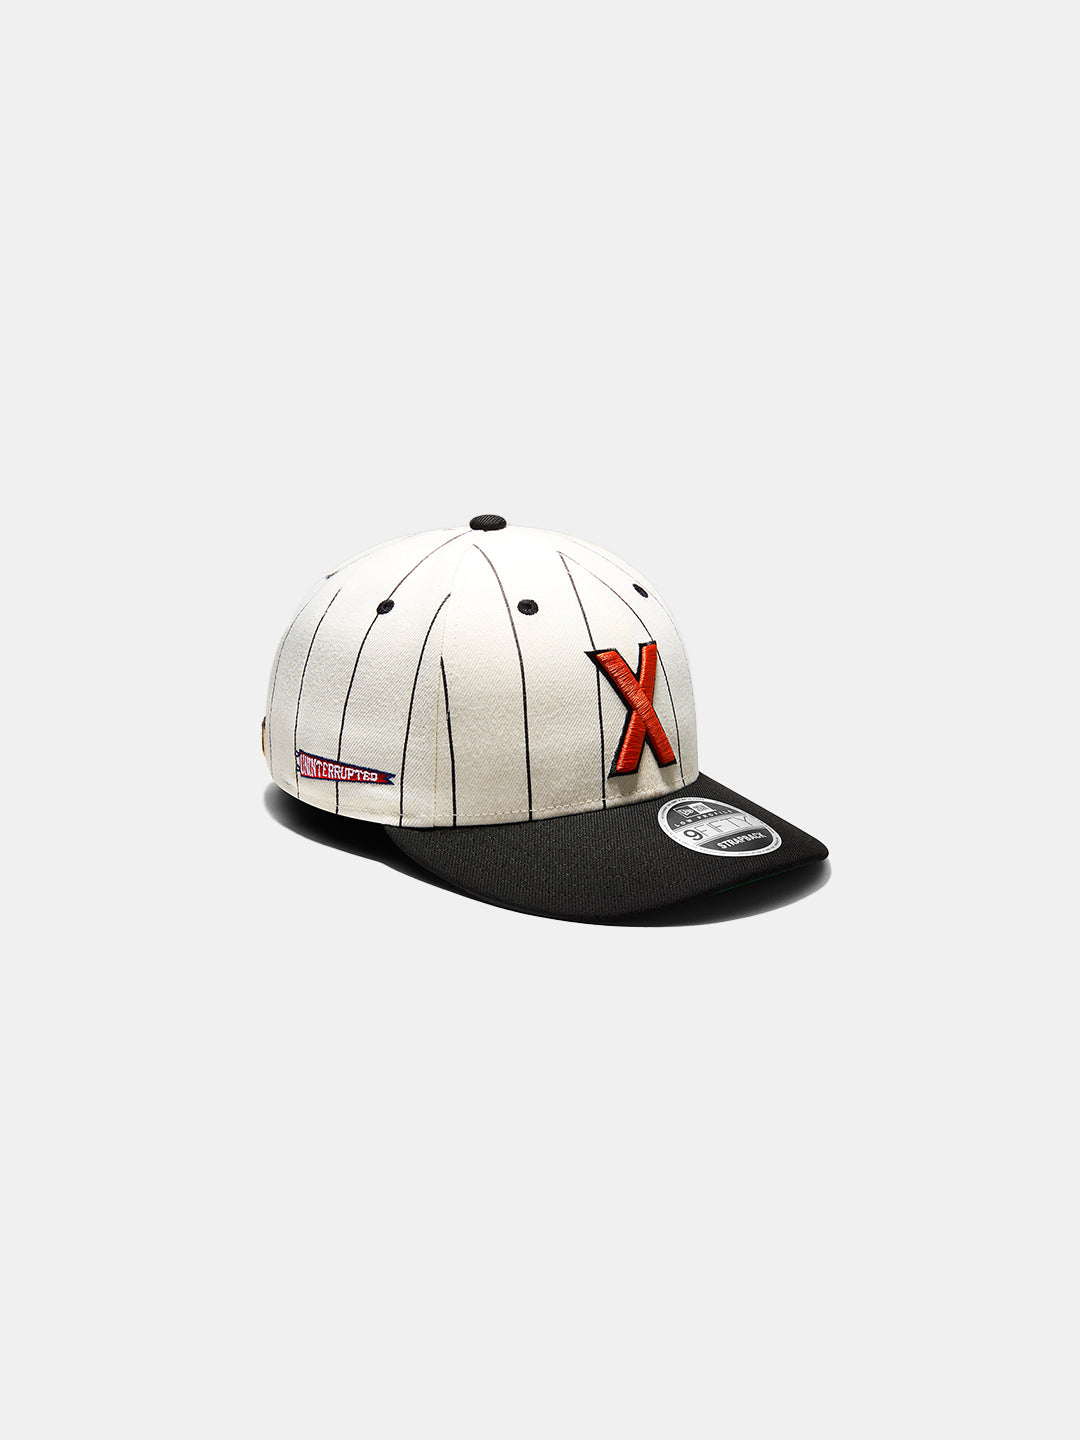 Cuban X Giants X UNINTERRUPTED Low Profile 9FIFTY - striped hat with an X logo on the front.